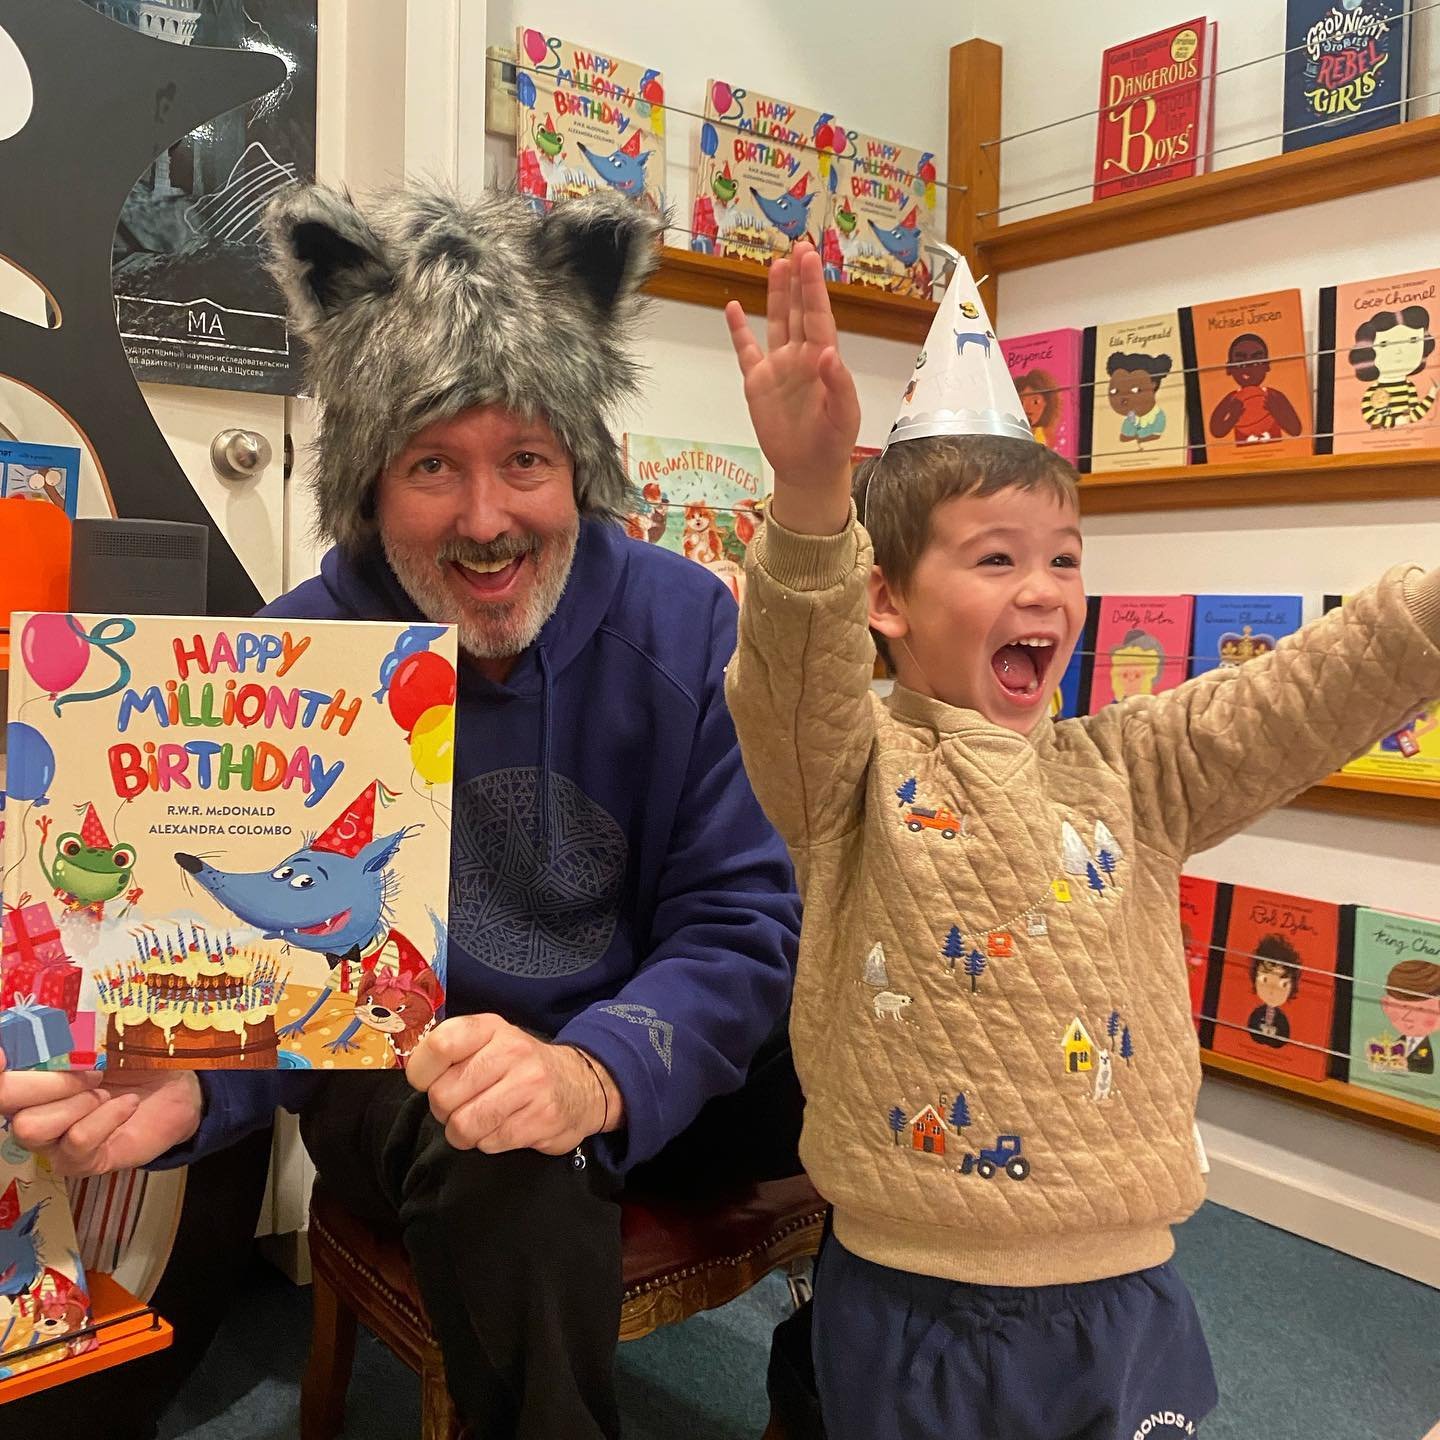 We had a wild time at preschool story time this morning with special guest @rwrmcdonald reading us his hilarious new picture book &lsquo;Happy Millionth Birthday&rsquo; 
Everyone loved the book and had lots of fun making their own party hats. Thanks 